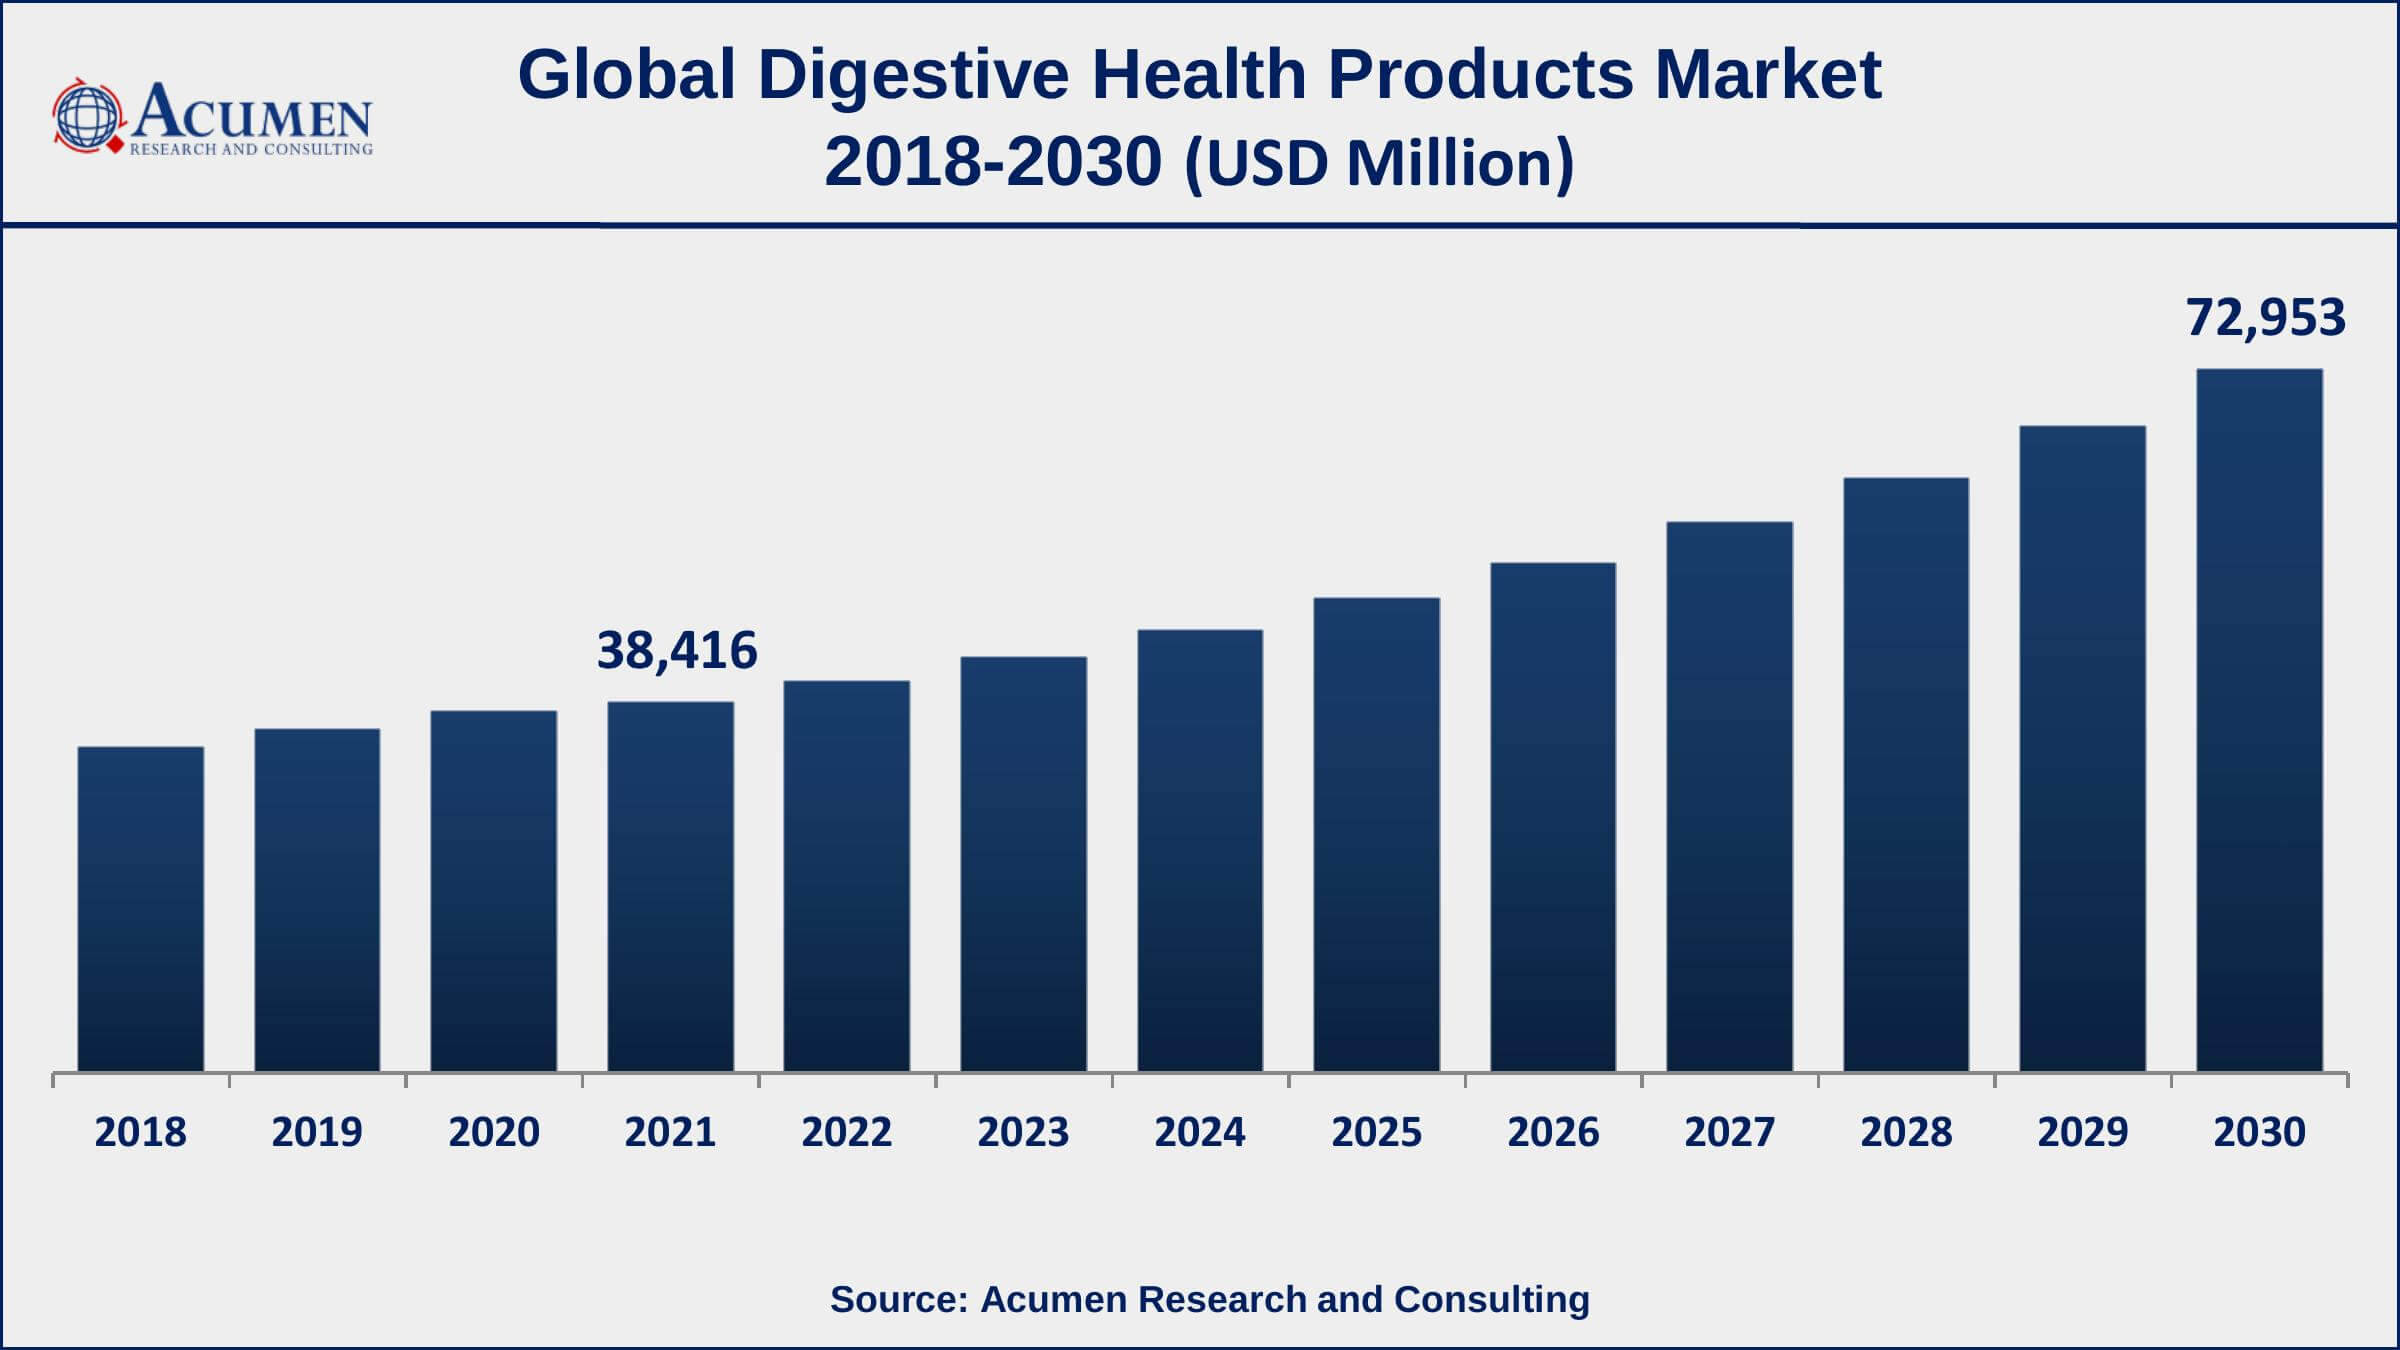 North America region accounted for over 34% of the digestive health products market shares in 2021